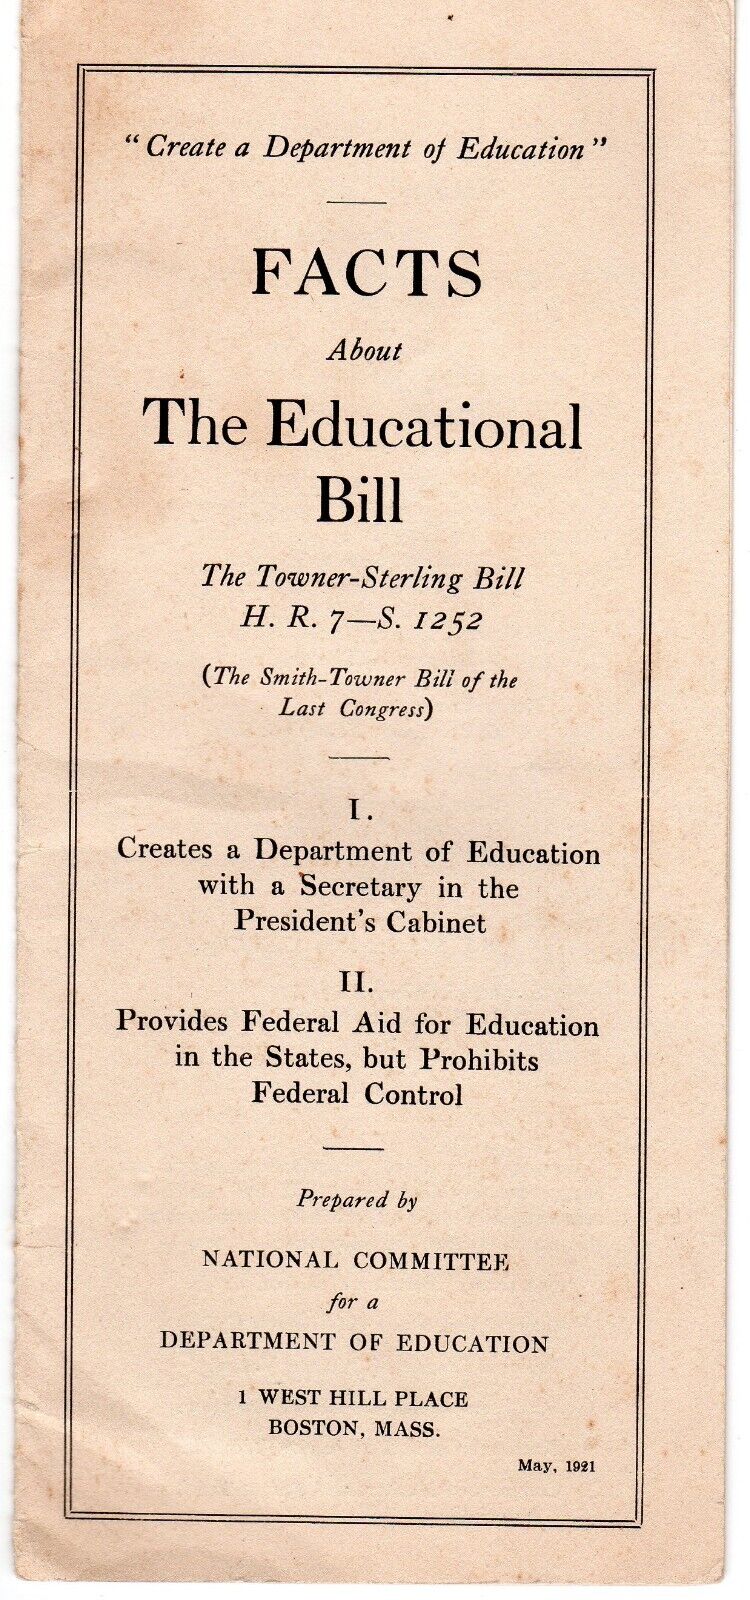 1921 Pamphlet Promoting Cabinet Level Department of Education